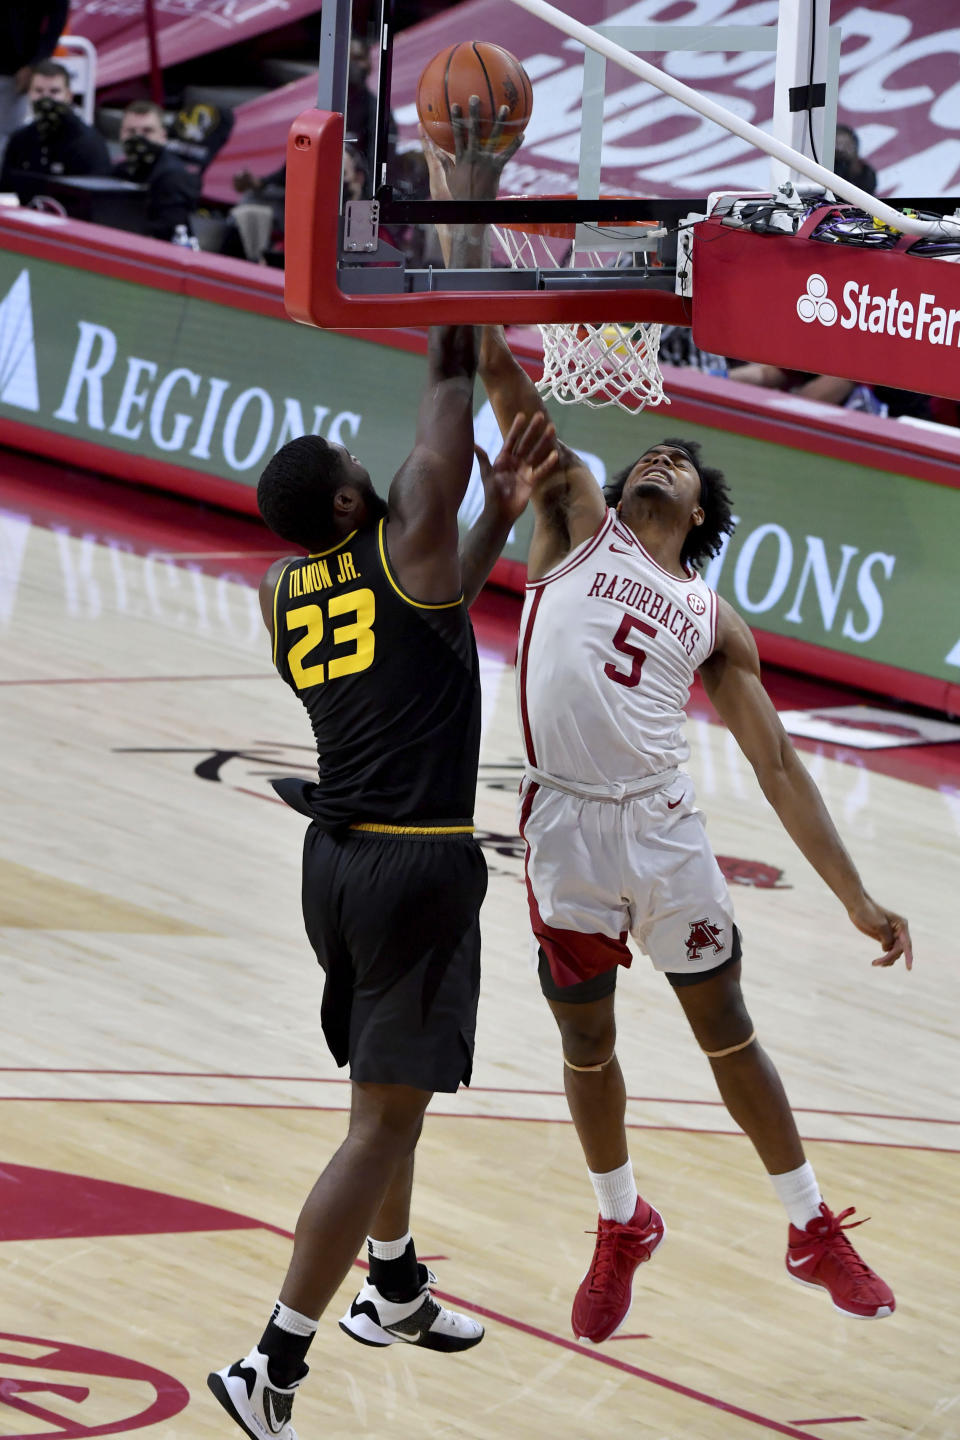 Arkansas defender Moses Moody (5) blocks the shot of Missouri forward Jeremiah Tilmon (23) during the first half of an NCAA college basketball game in Fayetteville, Ark. Saturday, Jan. 2, 2021. (AP Photo/Michael Woods)